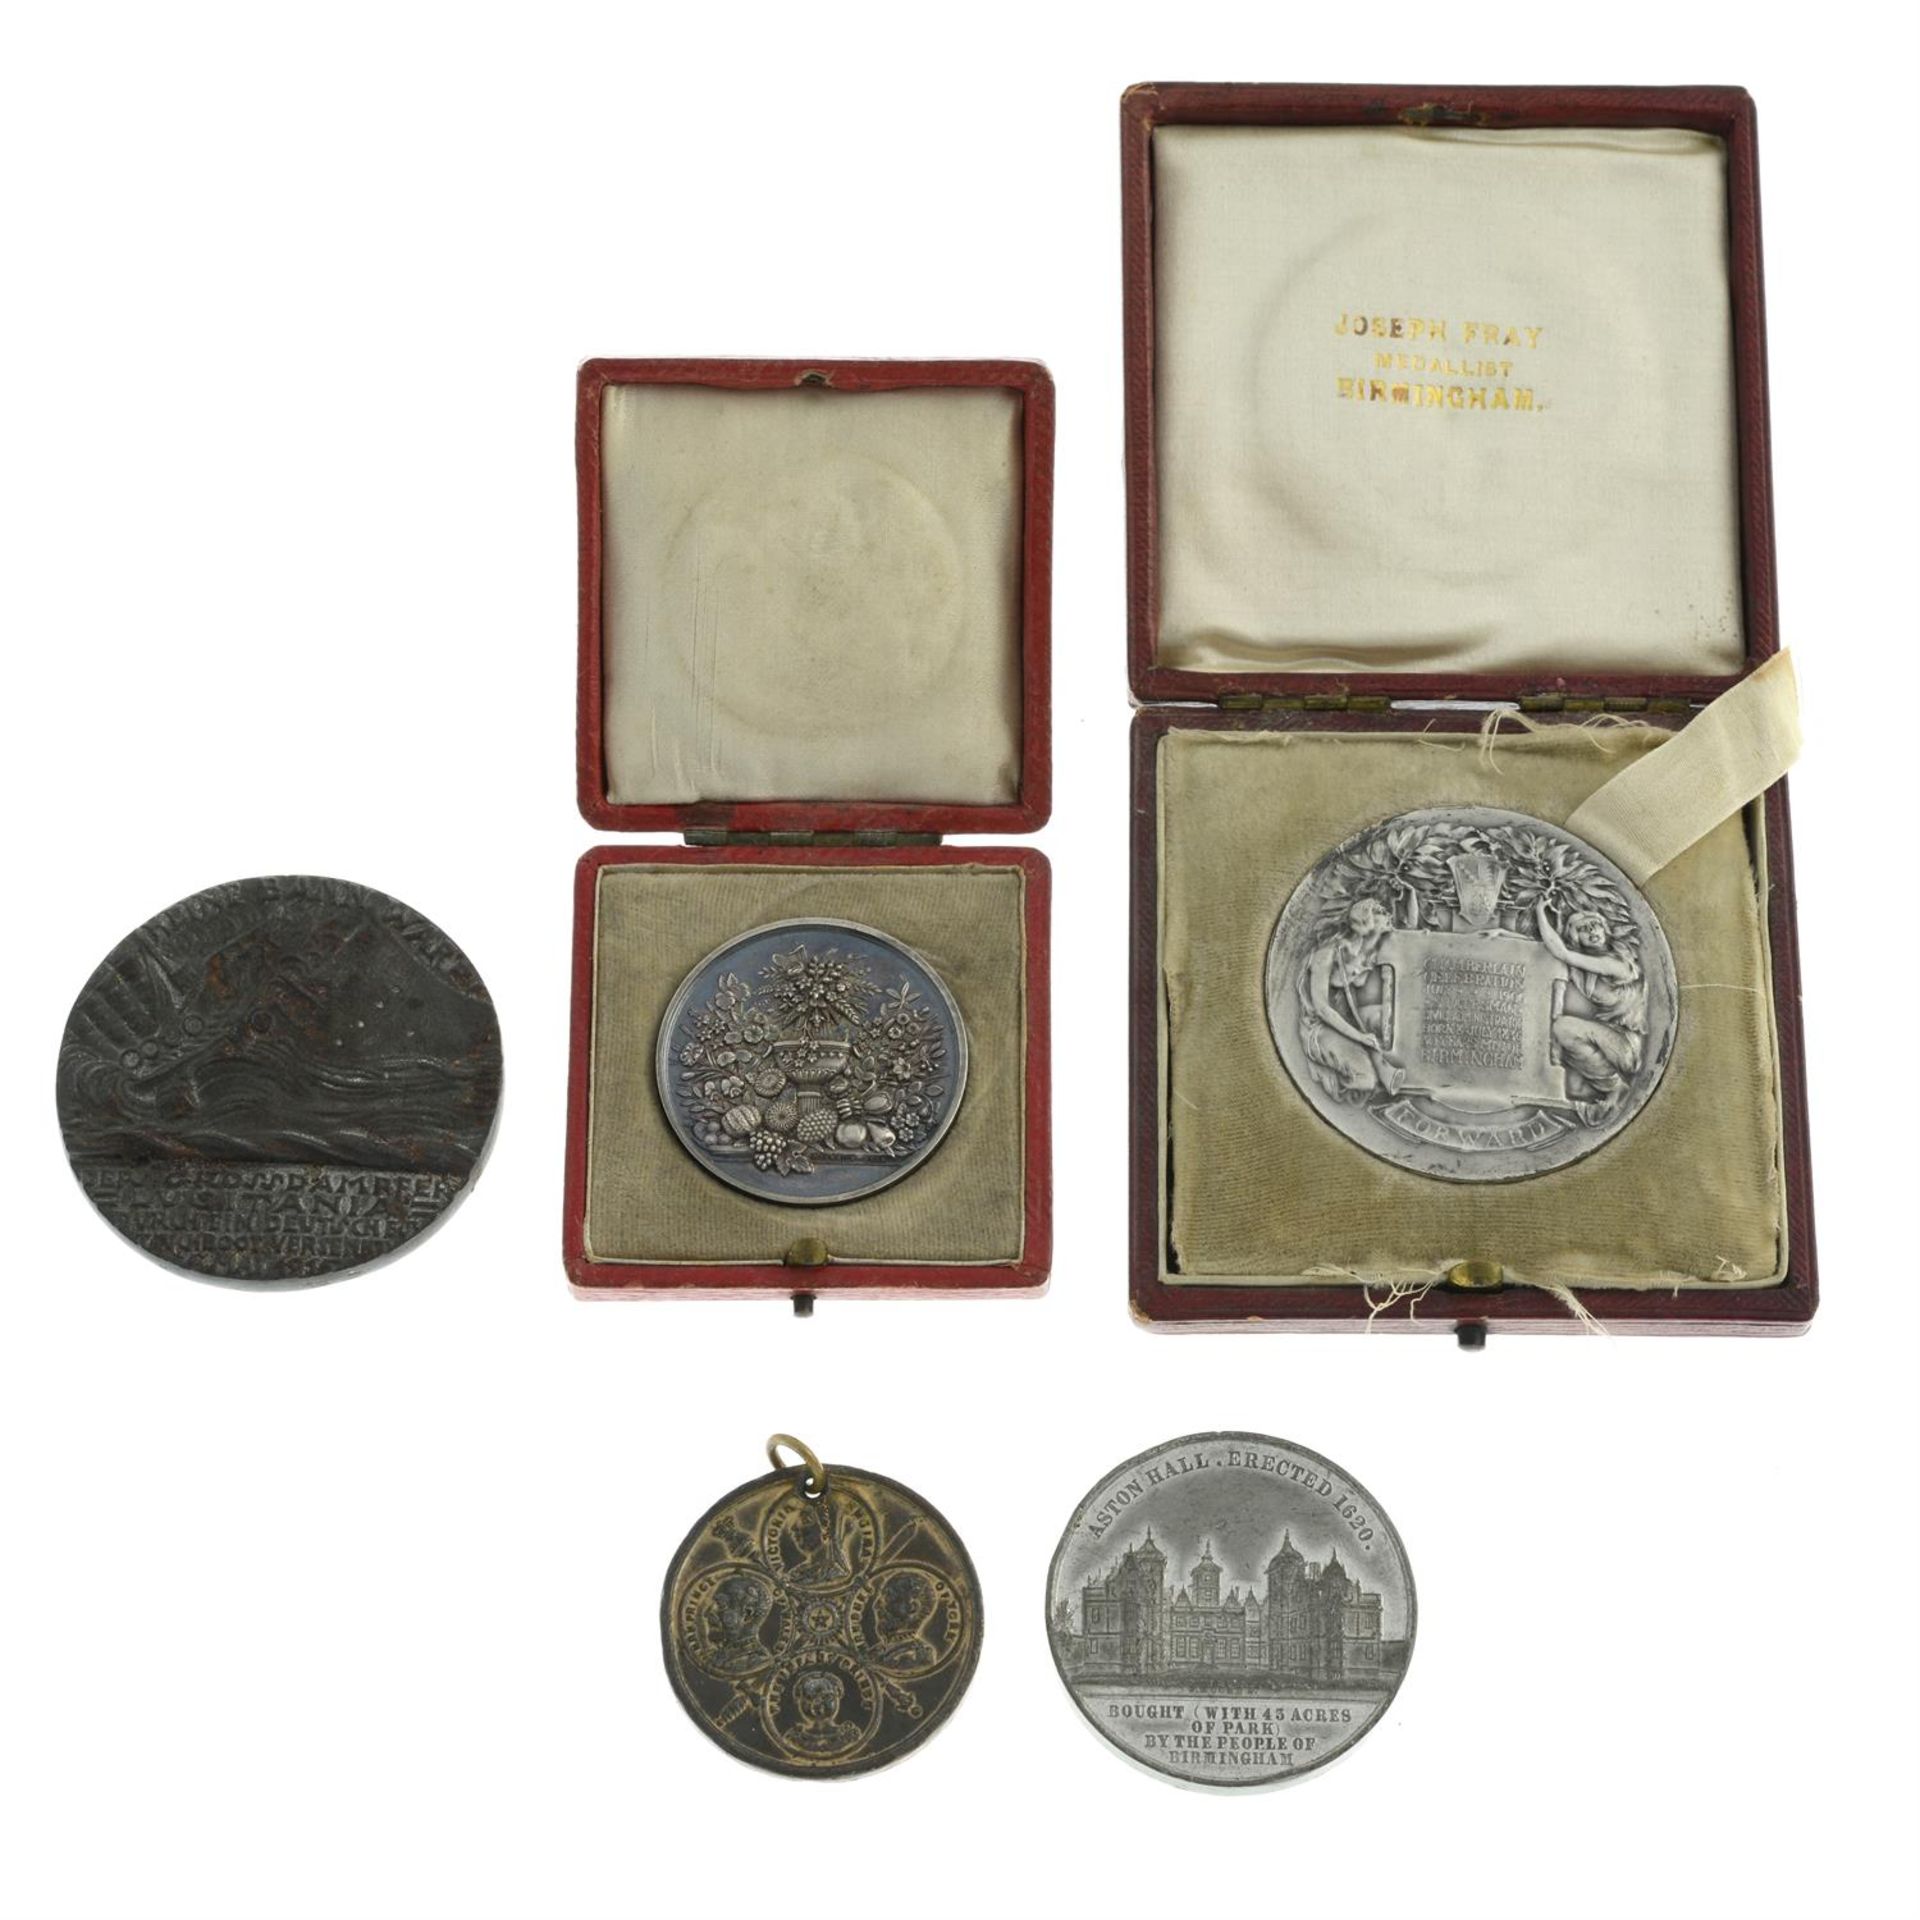 Aston Hall & Park Medal, along with 4 others.